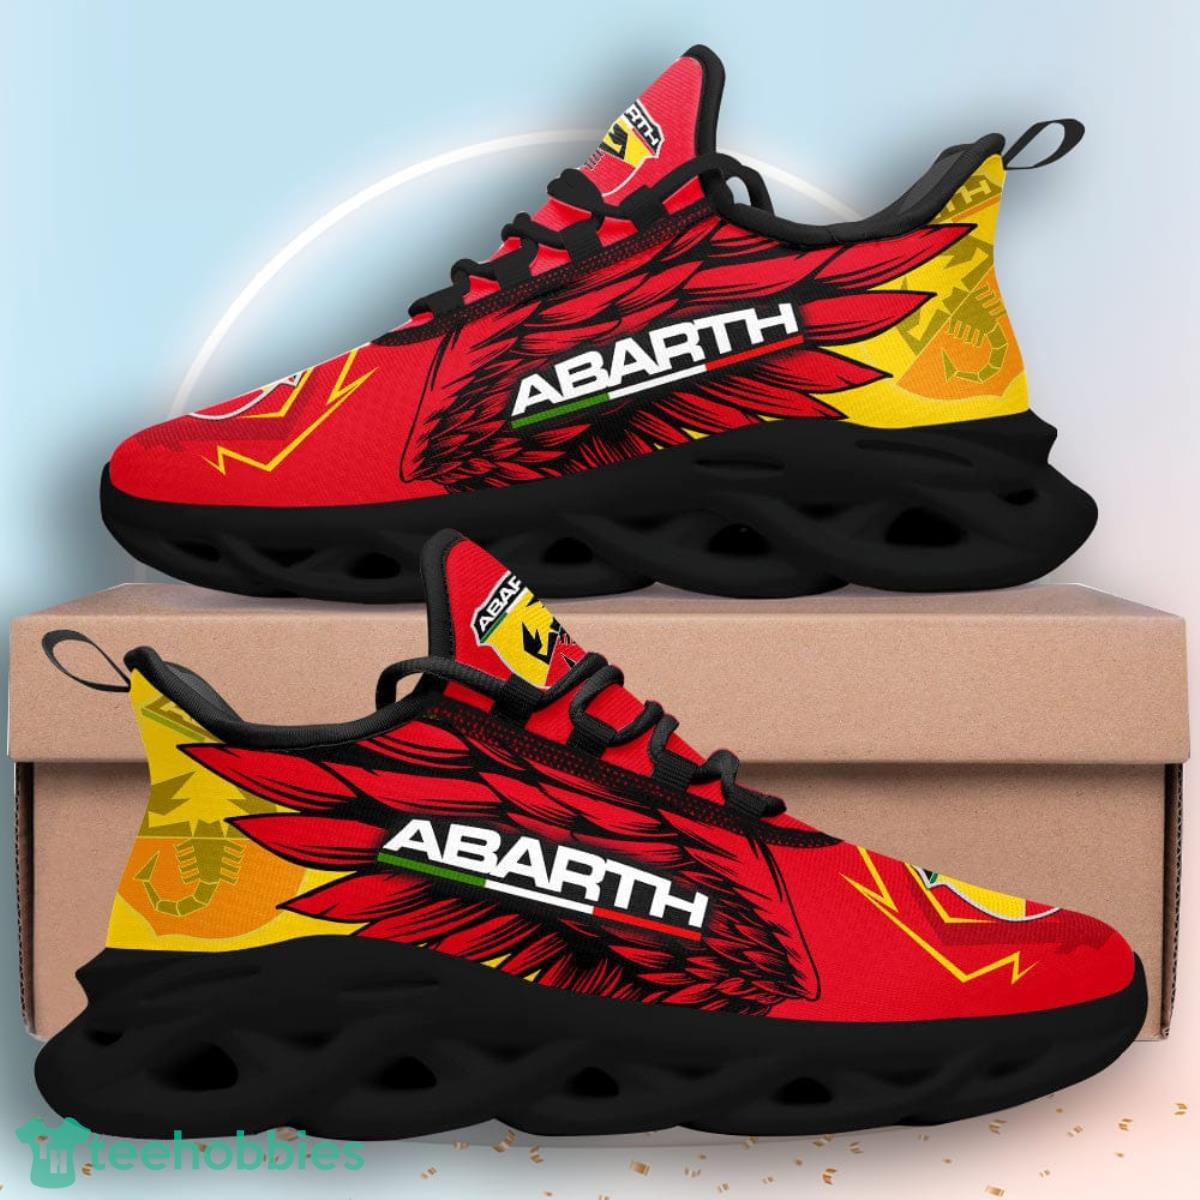 Abarth Team Max Soul Shoes Running Sneakers Product Photo 2